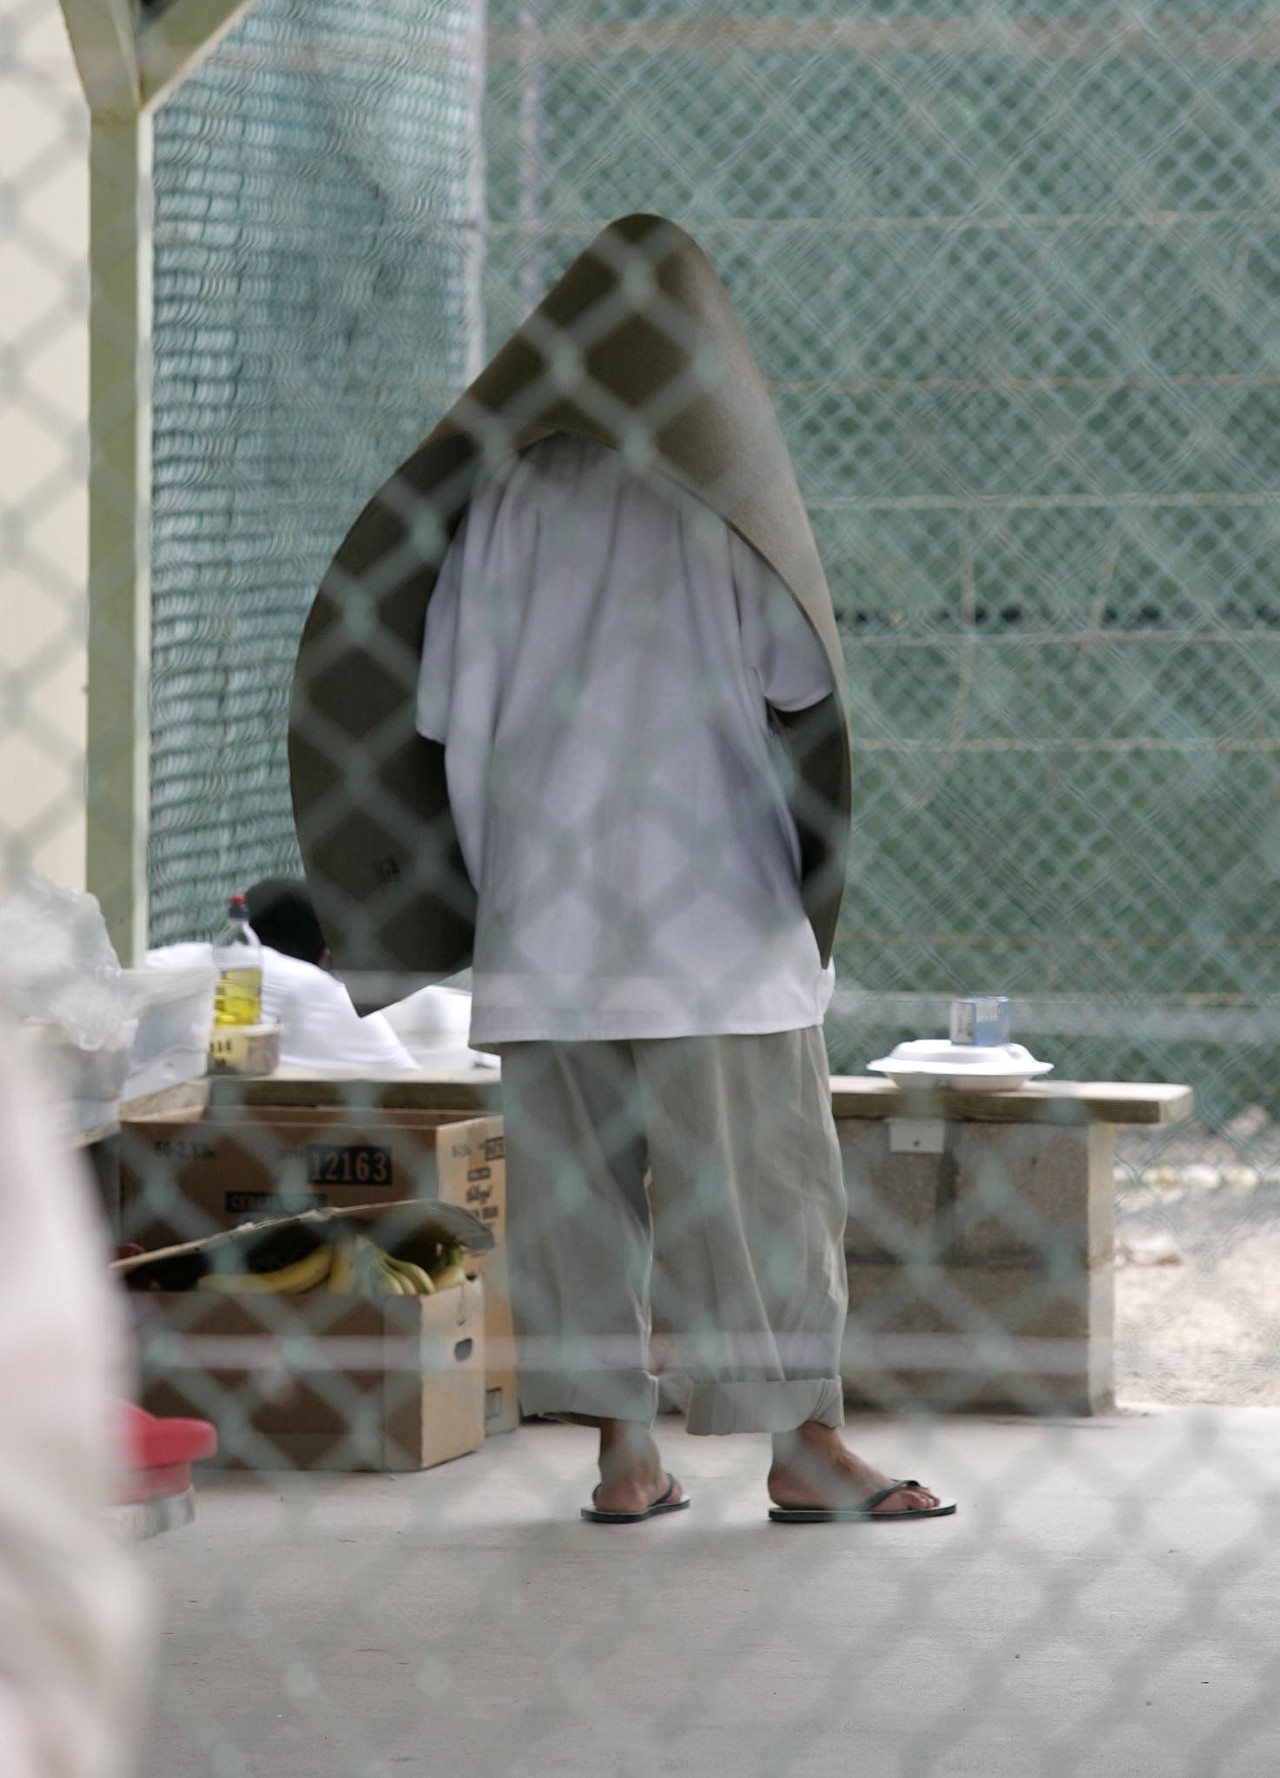 A detainee at Camp 4, the lowest-security area for the best-behaved inmates.